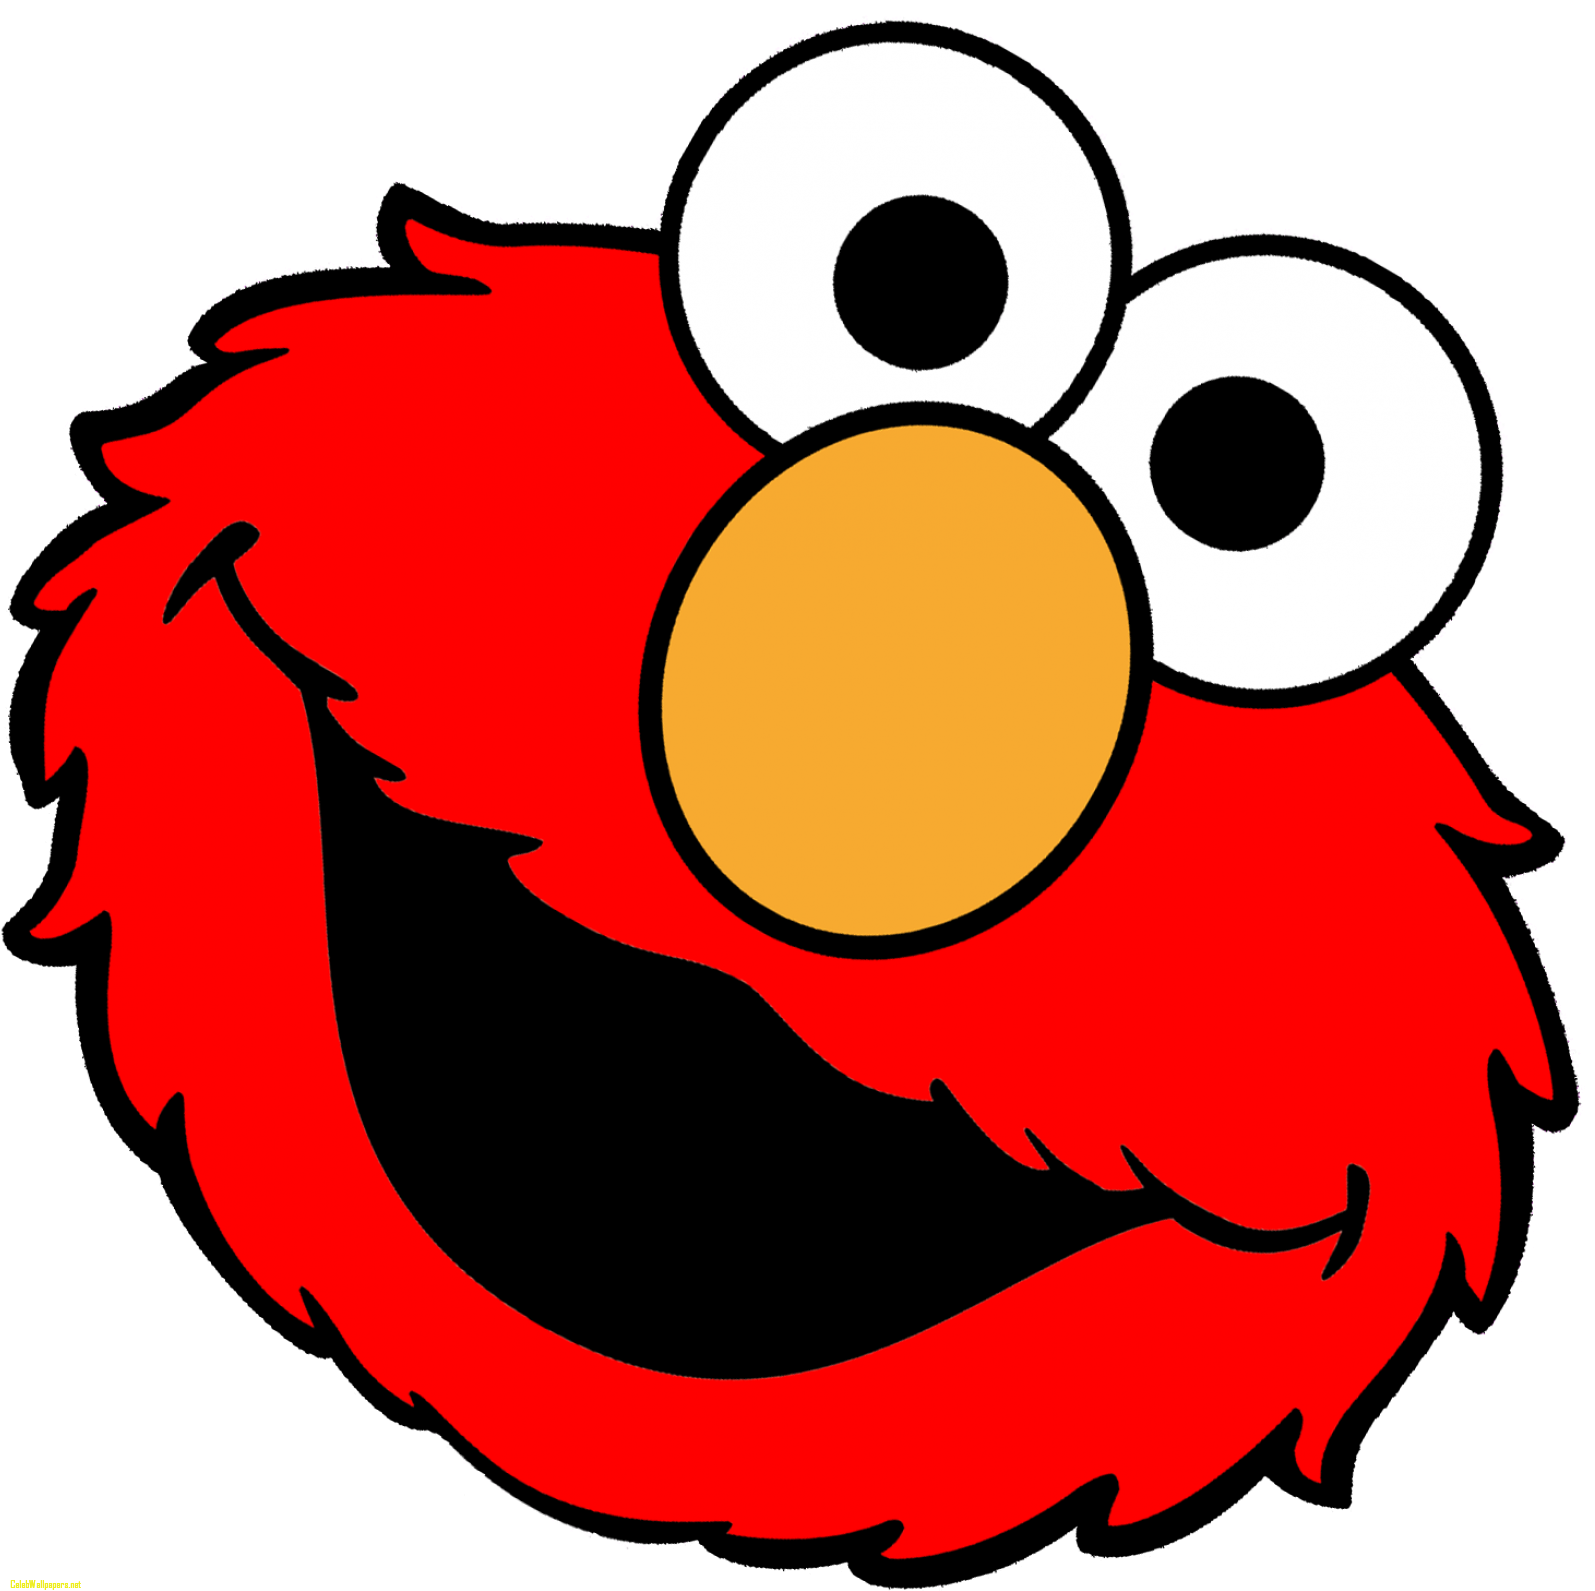 0 Result Images of Transparent Sesame Street Characters Png - PNG Image ...